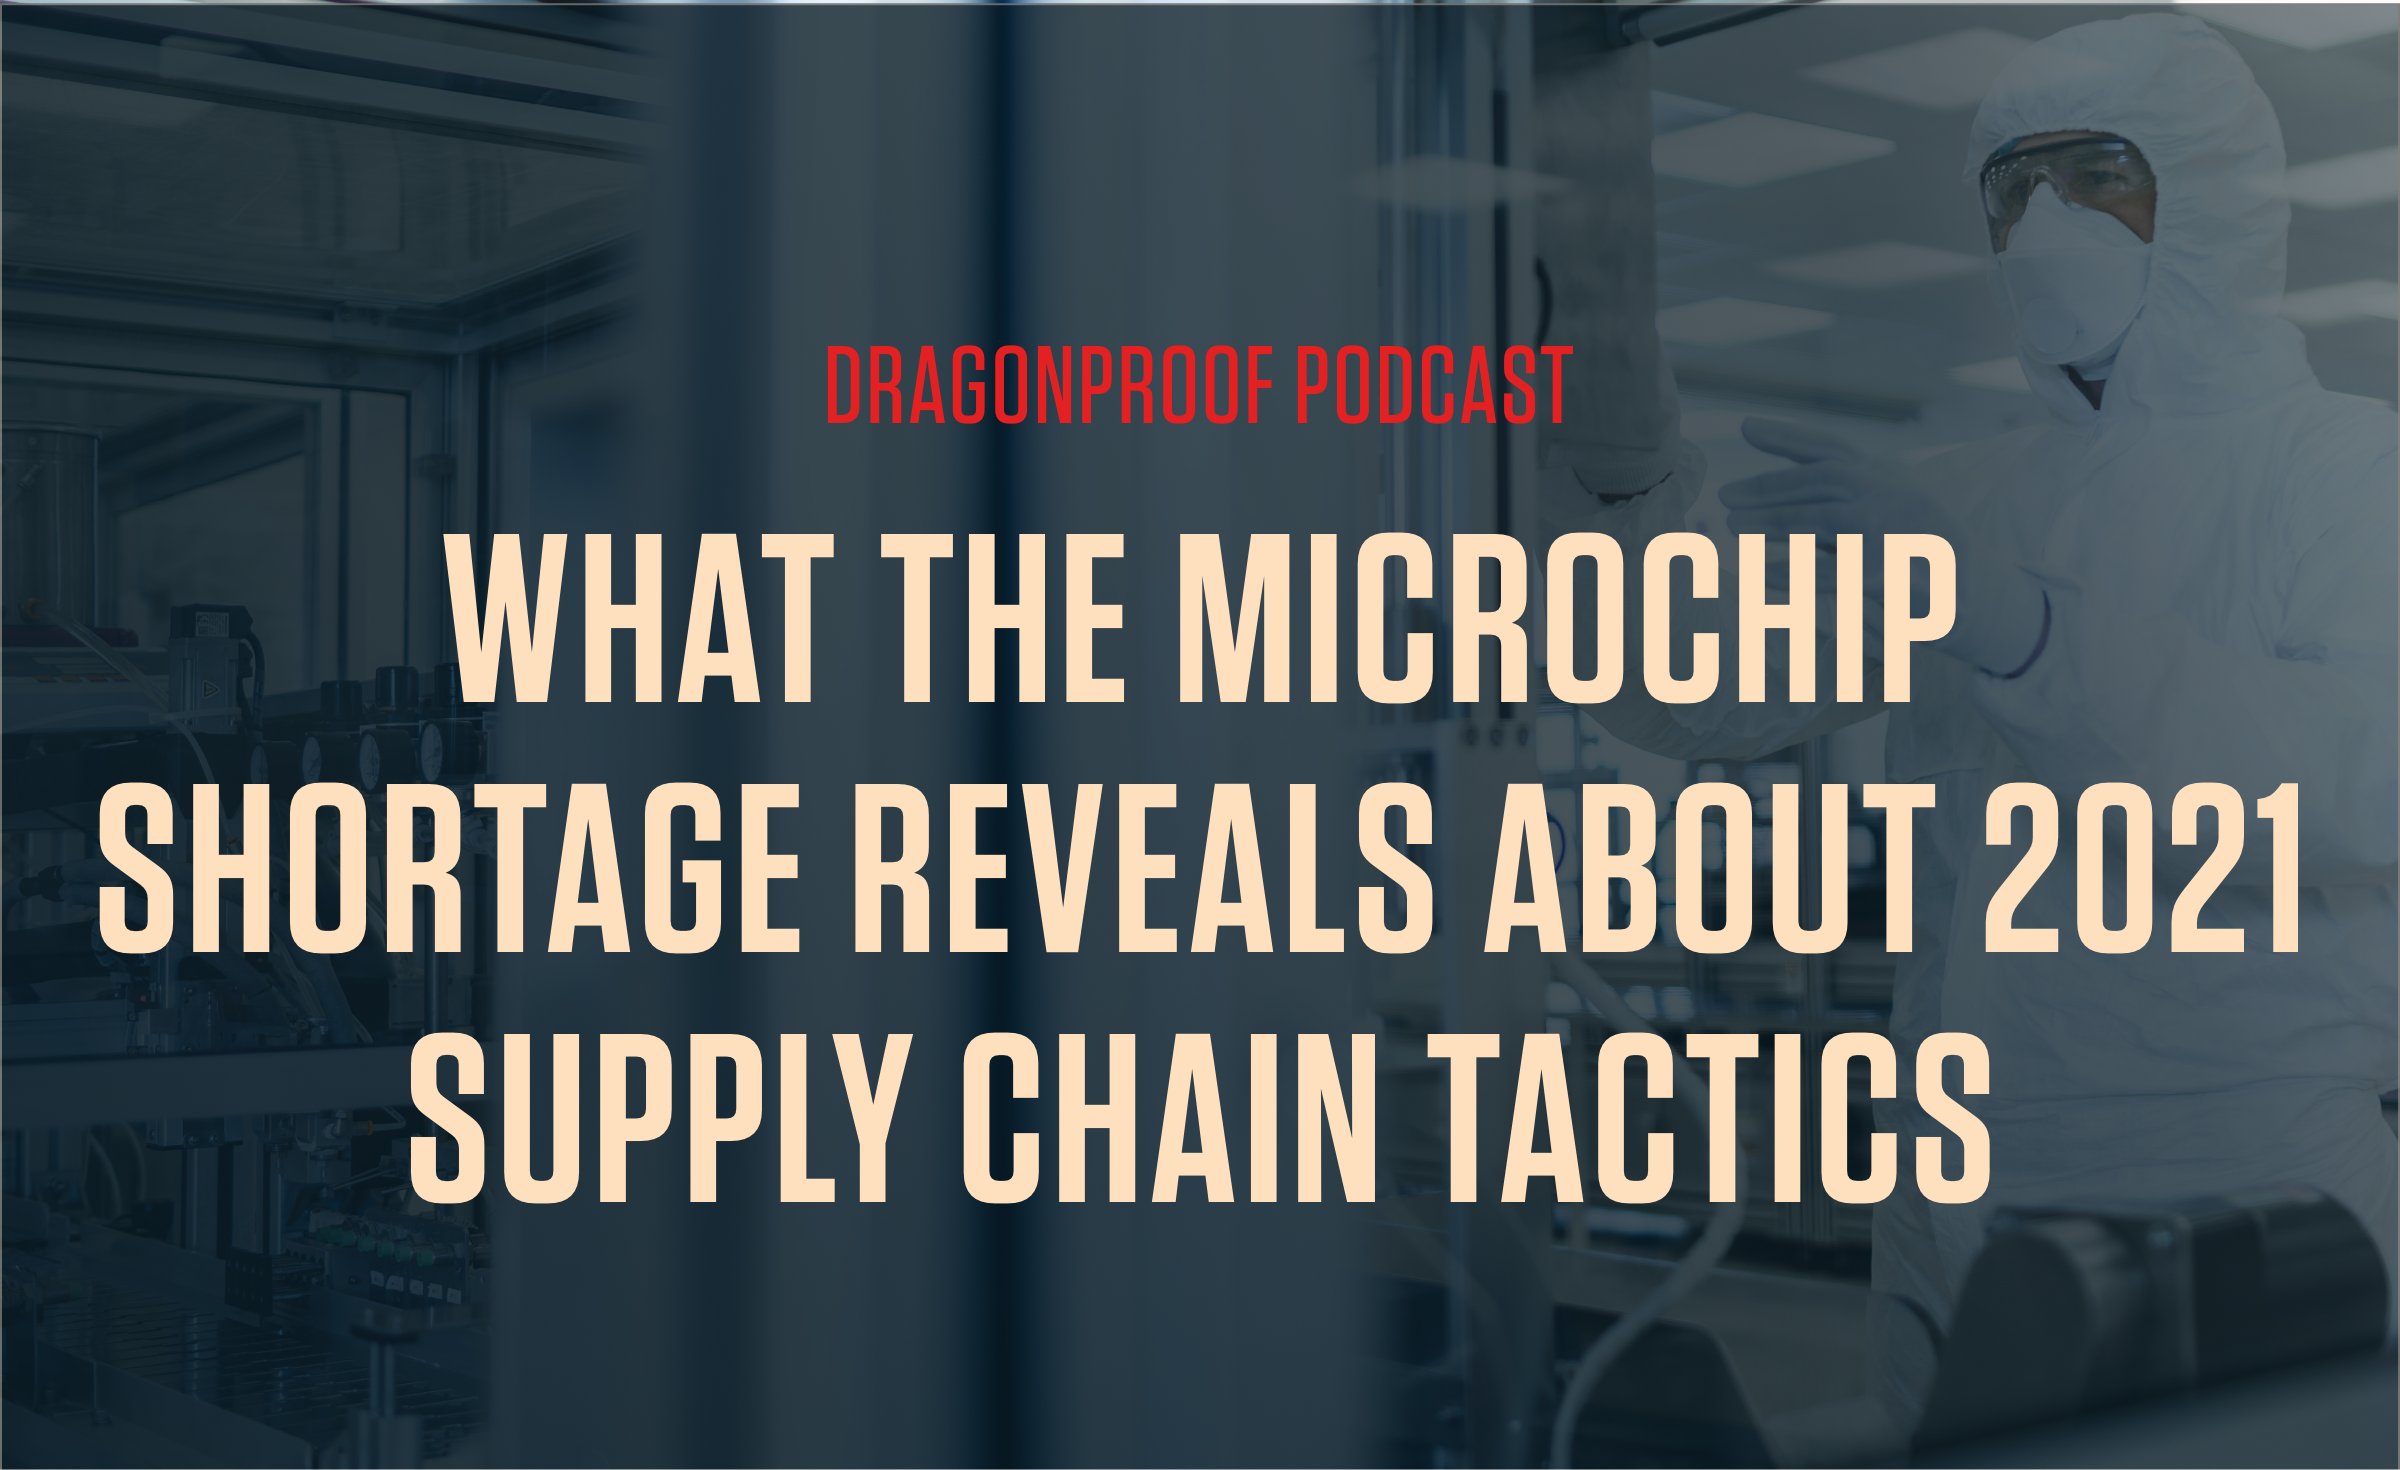 Dragonproof Podcast | What the Microchip Shortage Reveals About 2021 Supply Chain Tactics